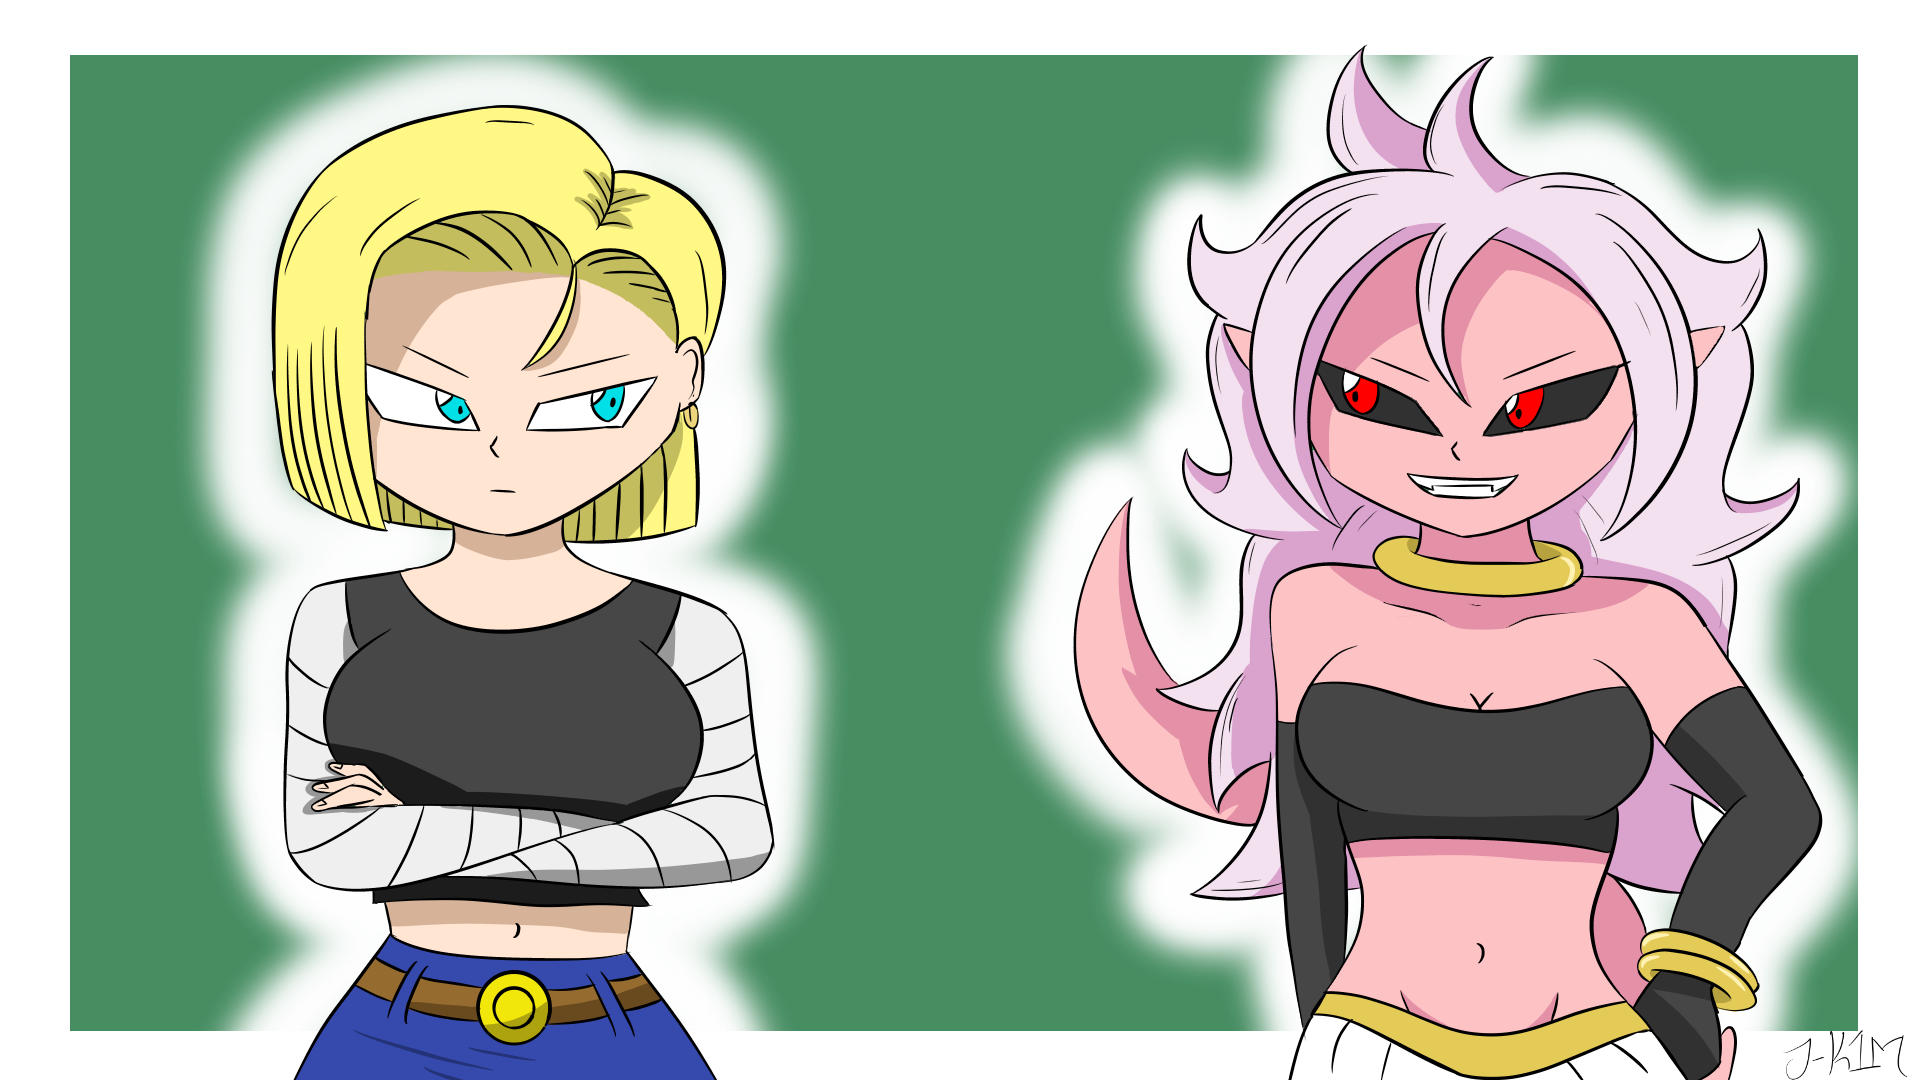 Android 18 X Android 21 , HD Wallpaper & Backgrounds